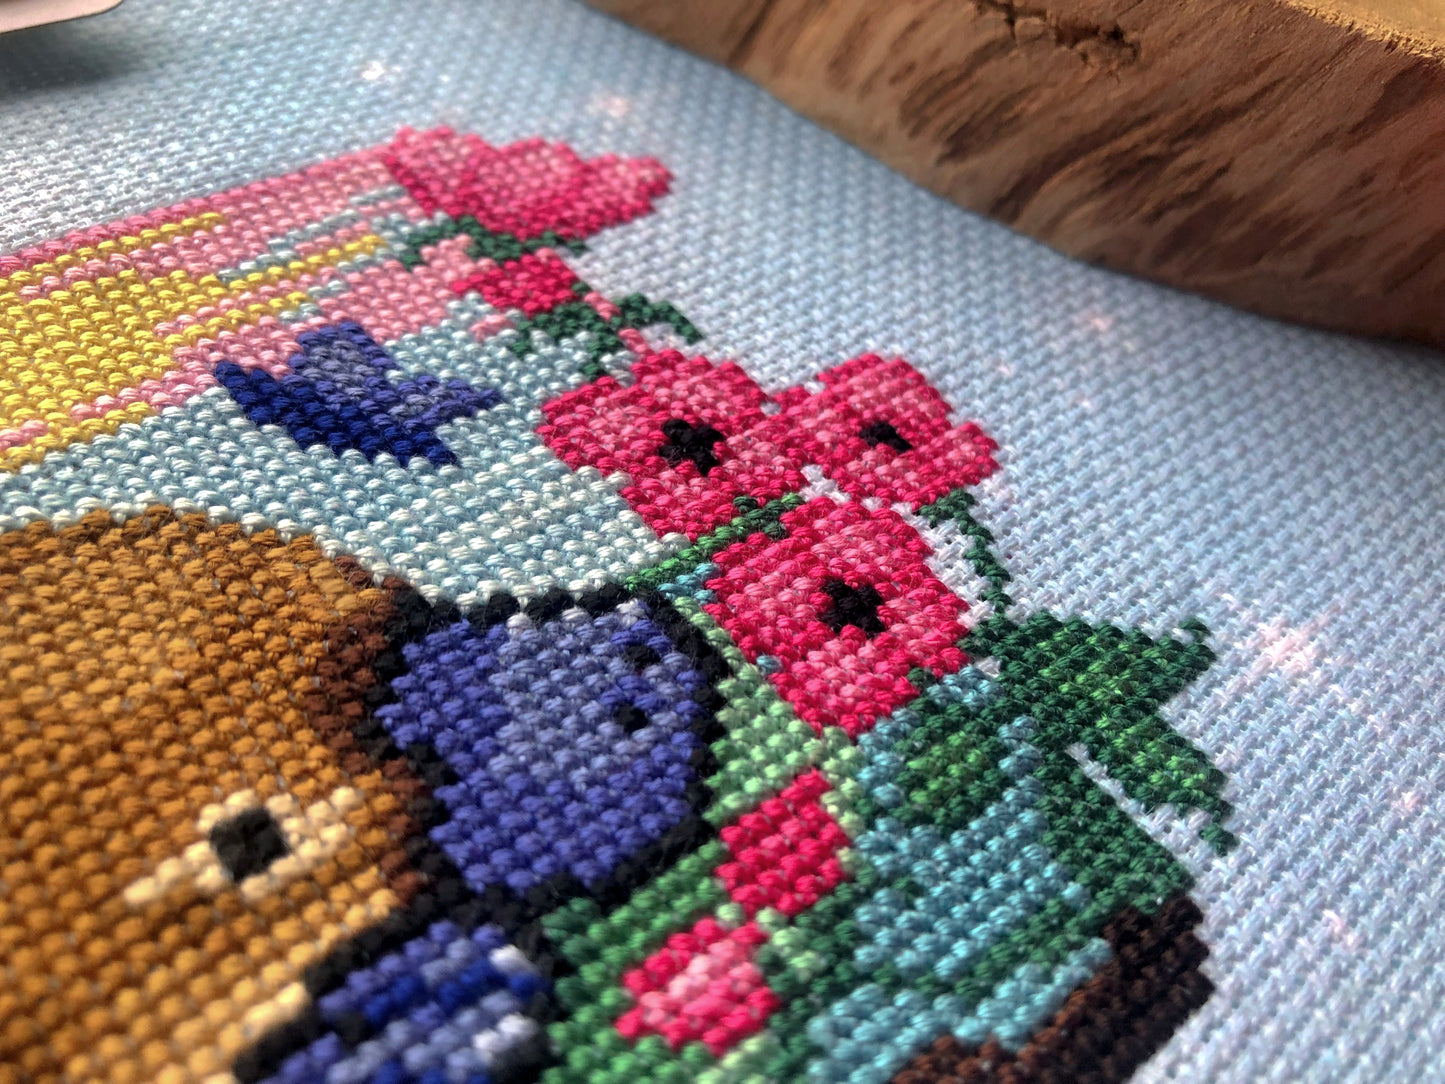 Extreme closeup of righthand side of platypus cross stitch pattern. Platypus is sniffing the pink flowers, which have black cores. Stitches are neat and tidy. Colors are vibrant. Platypus is adorable.